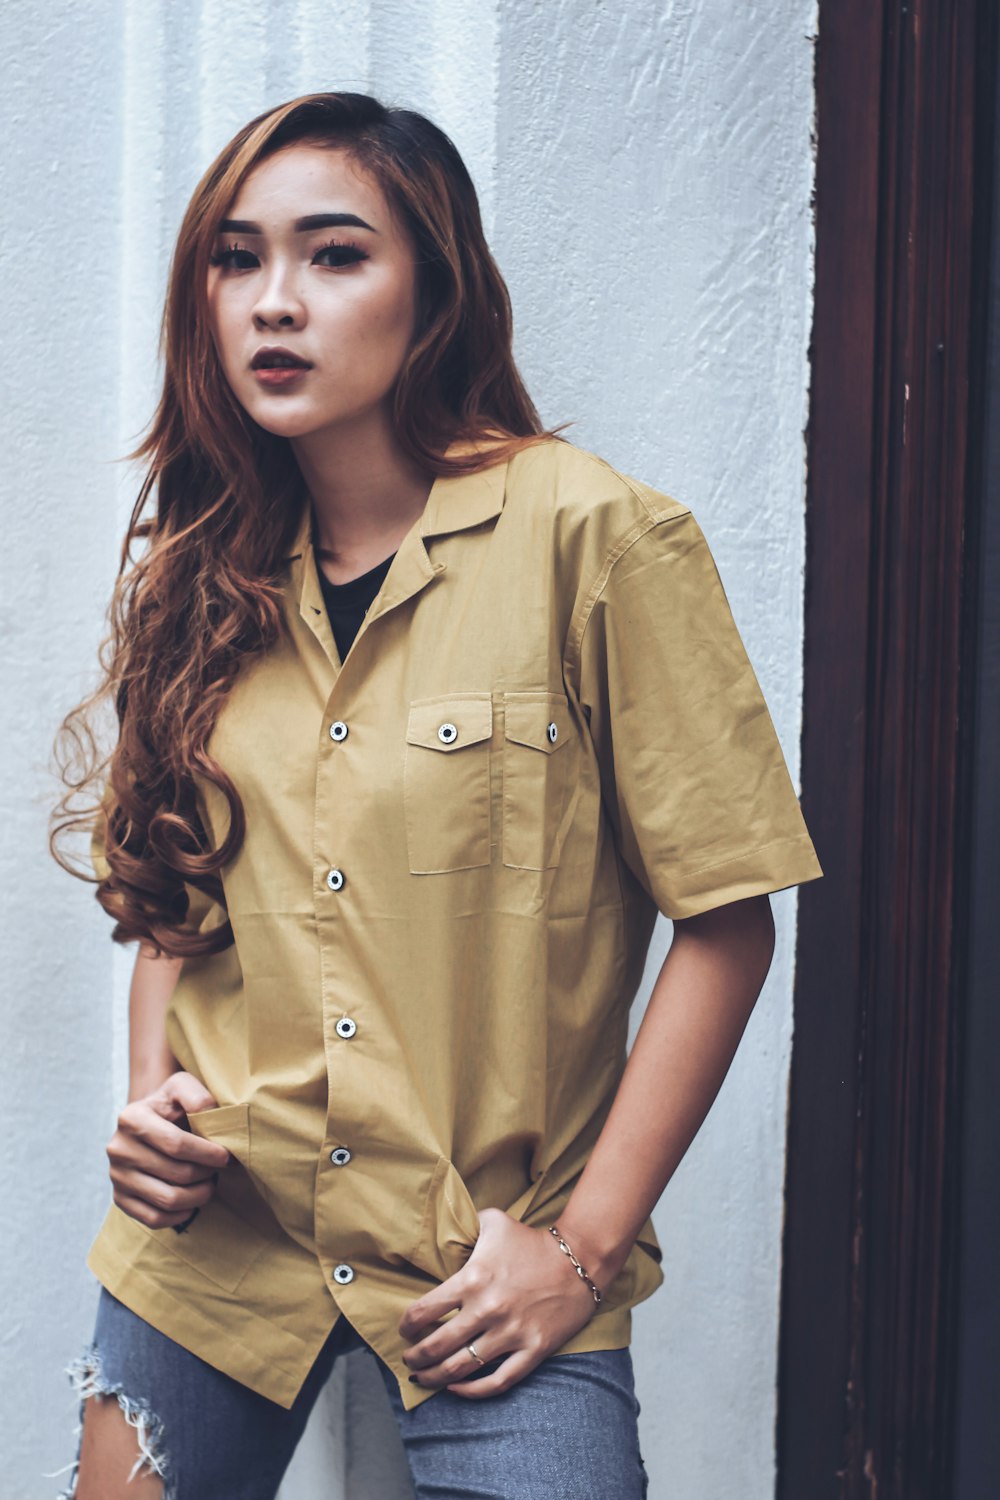 woman in yellow button up shirt leaning on white wall